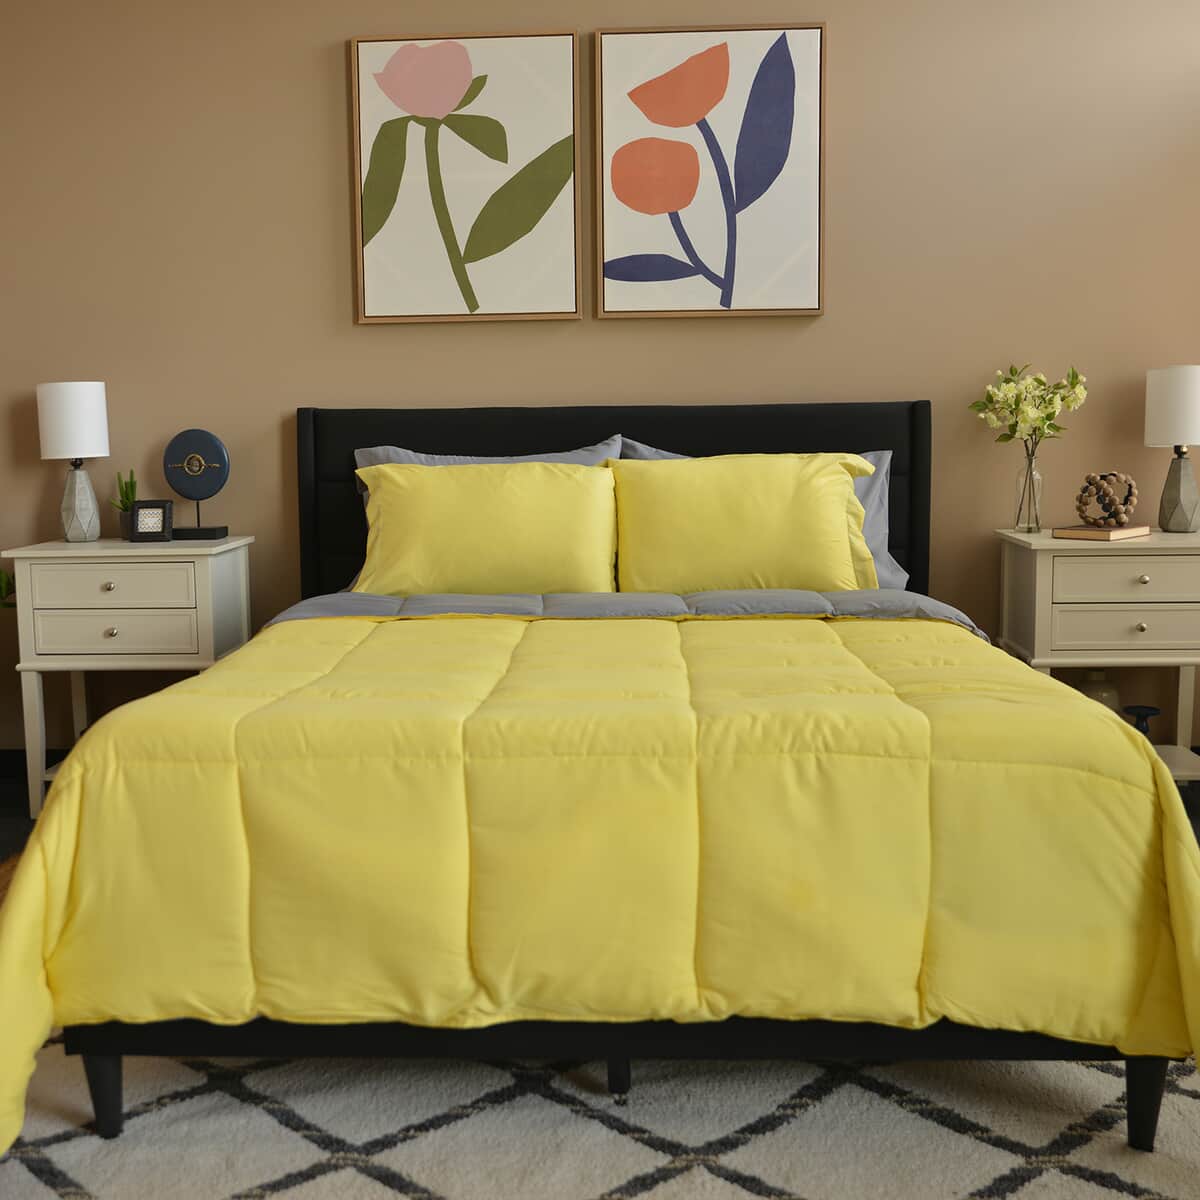 Victory Classic New York Closeout Lincoln Gray, Yellow Reversible 7pc Bed in a Bag Comforter Set Includes Sheet Set - Full image number 1